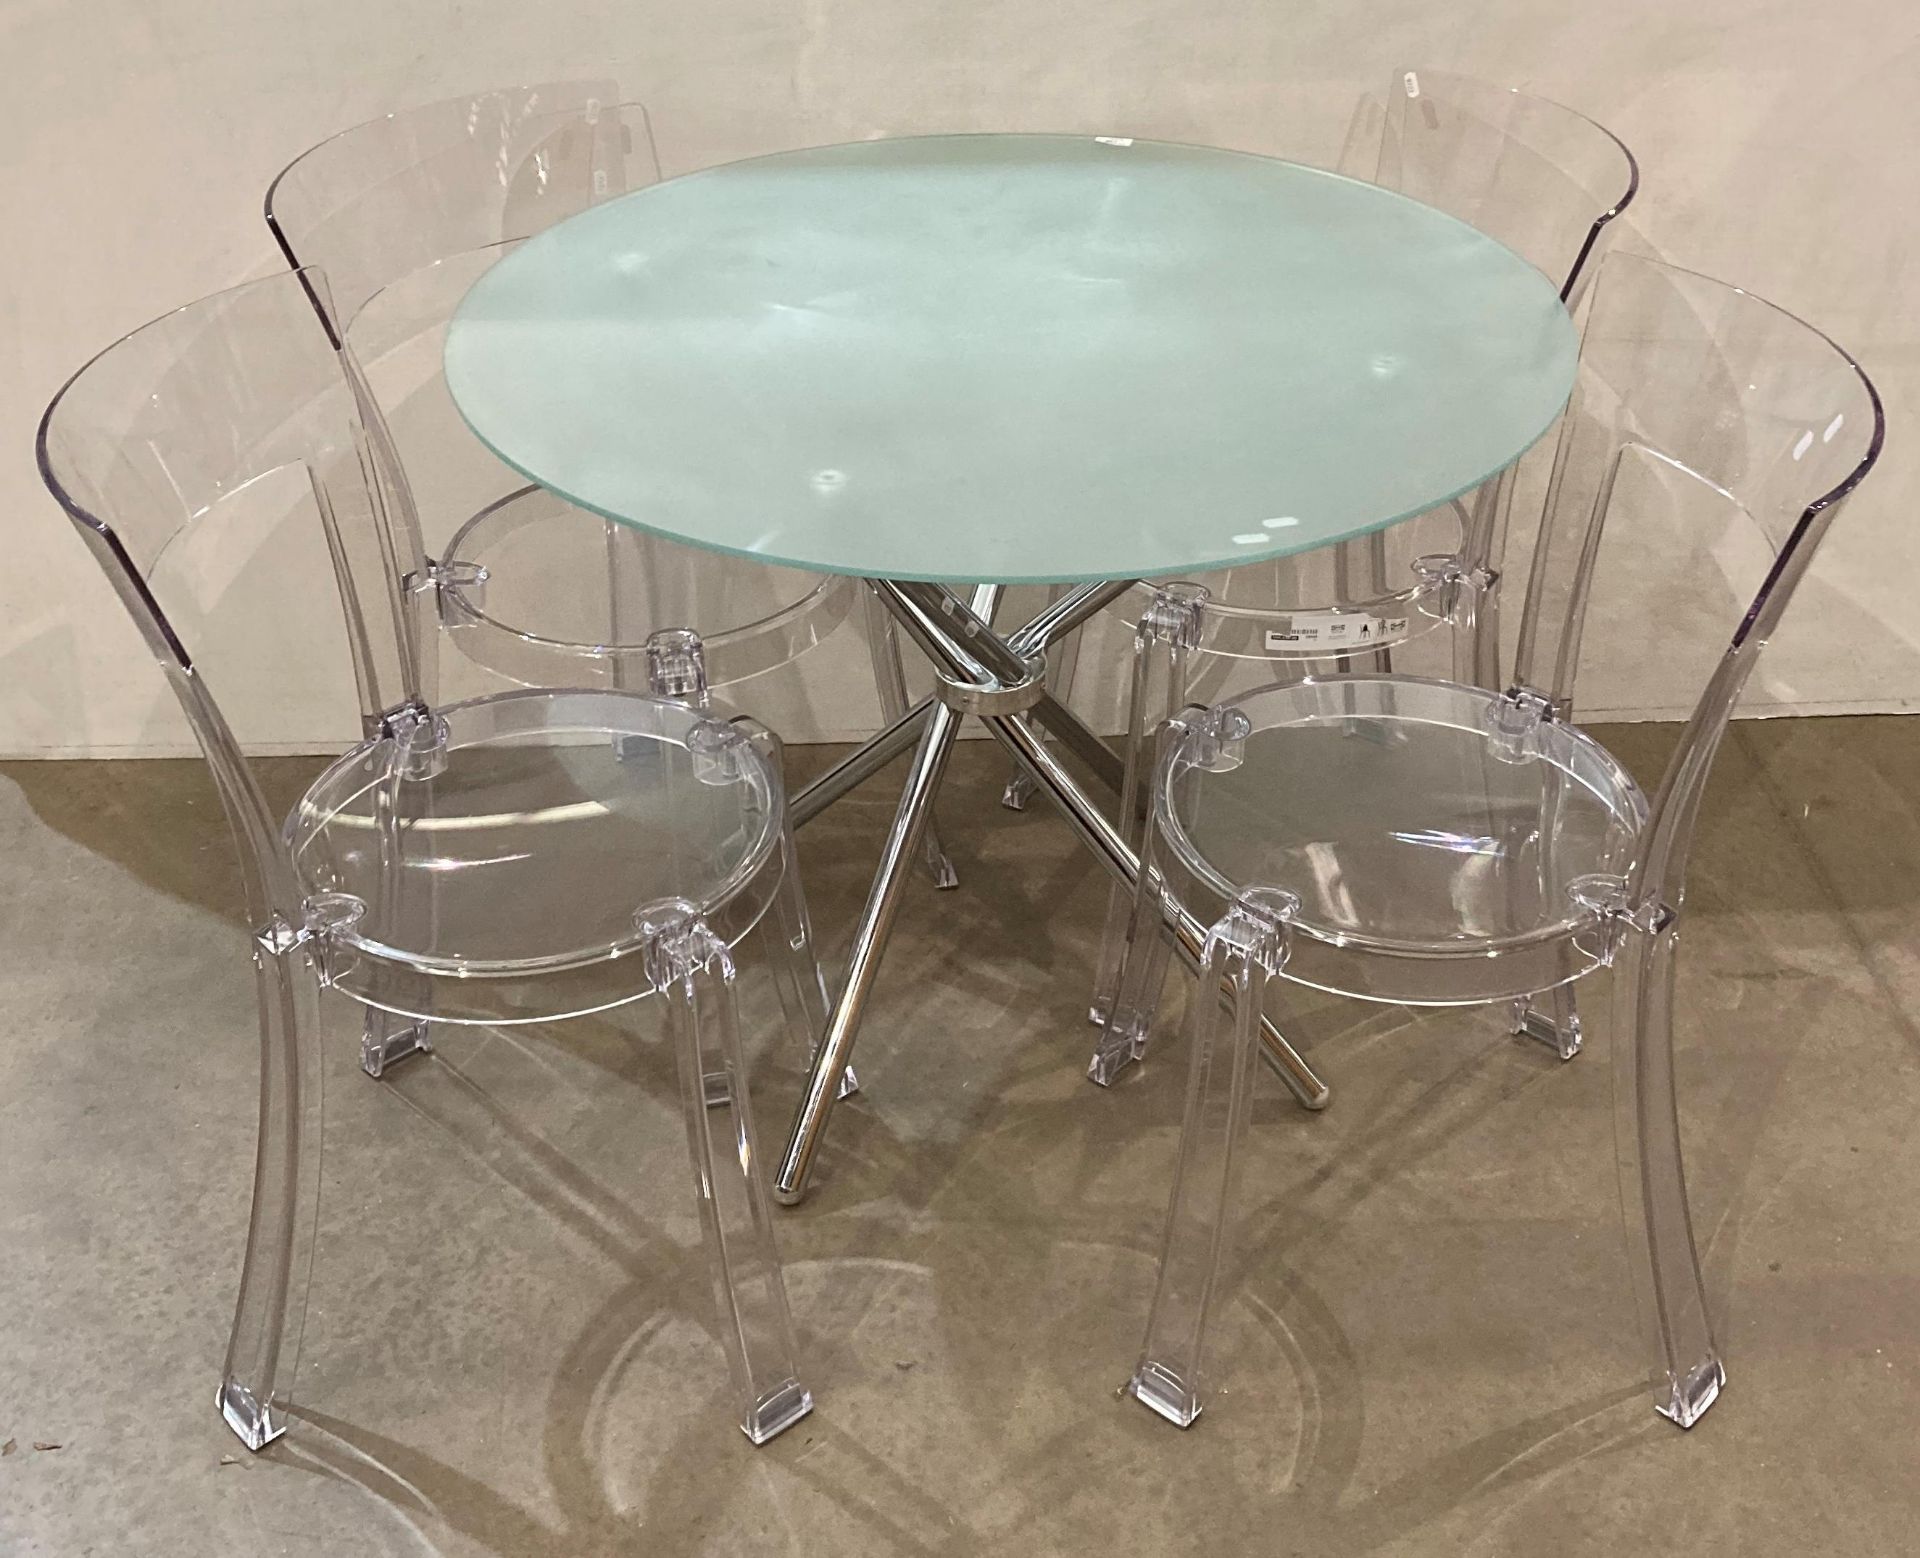 Circular frosted glass dining table on base (97cm diameter) and set of four Ikea Stein transparent